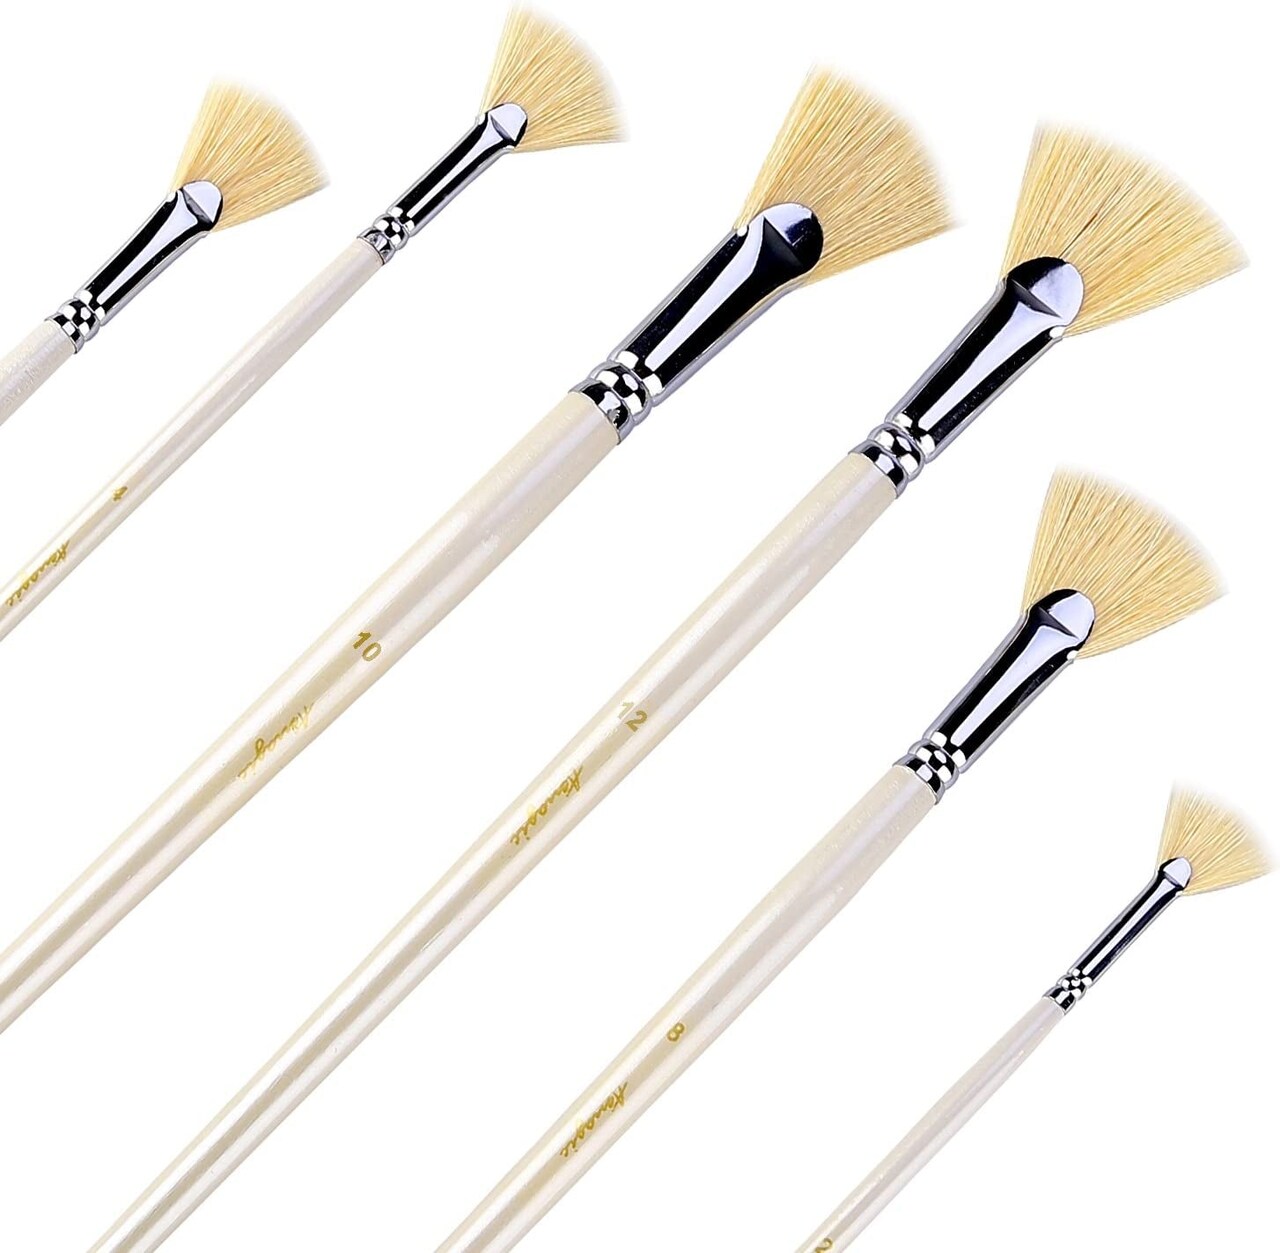 Amagic Fan Brush Set - Hog Bristle Natural Hair - Artist Soft Anti-Shedding Paint  Brushes for Acrylic Watercolor Oil Painting, Long Wood Handle with Case,  Set of 6